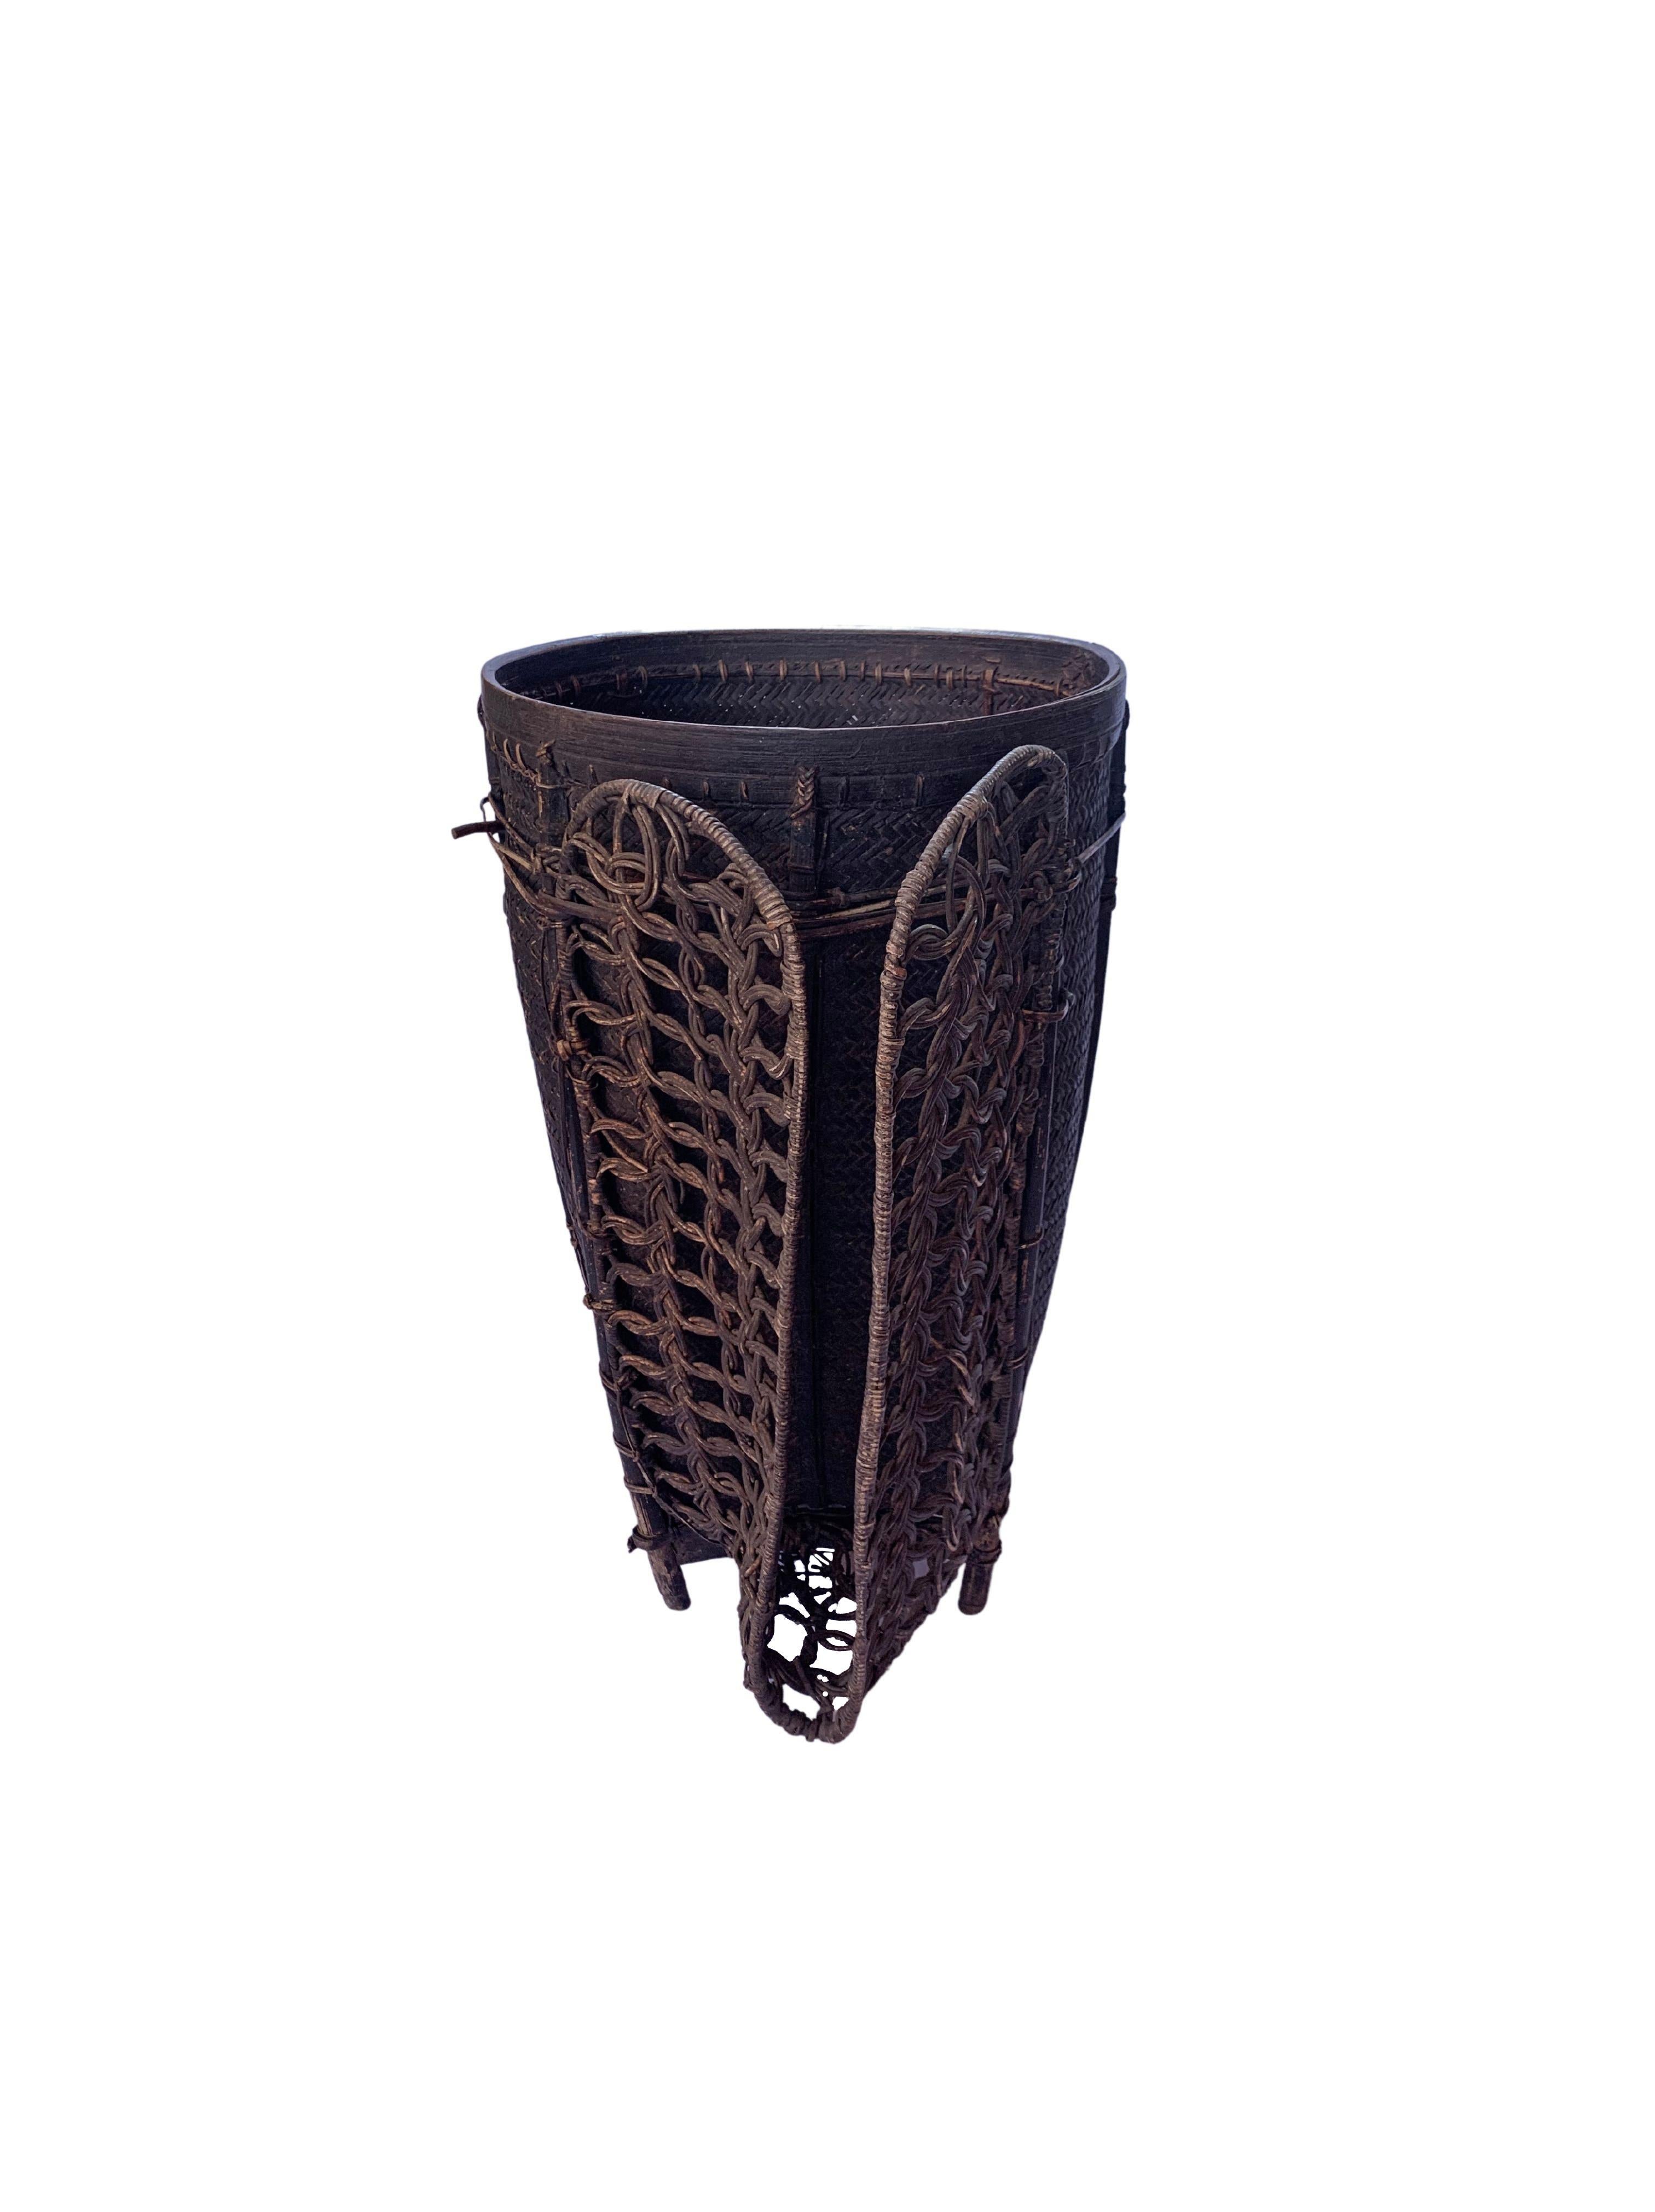 Vintage Rattan Basket Dayak Tribe Hand-Woven from Kalimantan, Borneo In Good Condition For Sale In Jimbaran, Bali